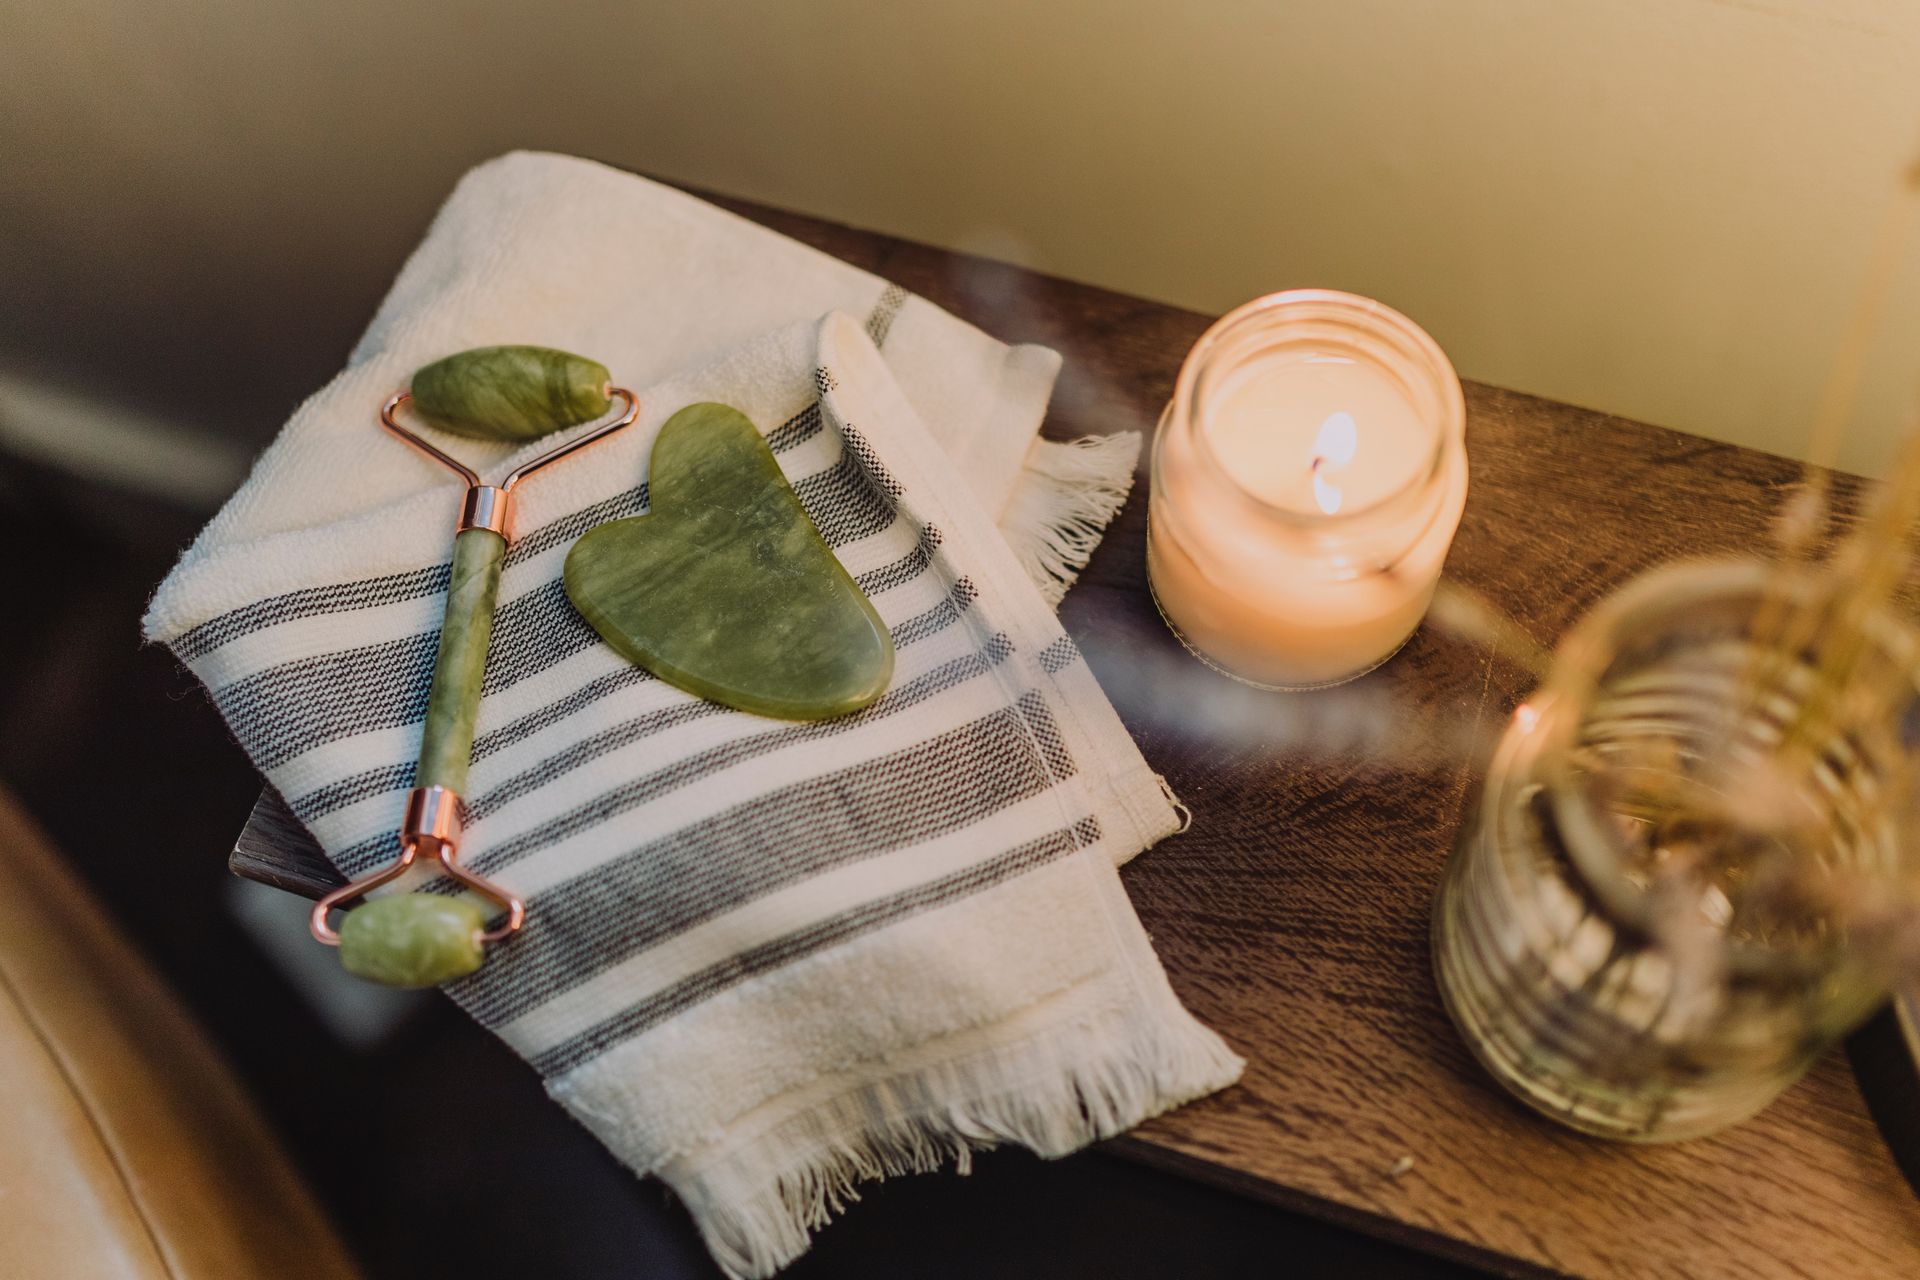 A wooden worktop has a lit candle on top of it, along with a blue and white striped towel, with a green Jade stone and face roller.